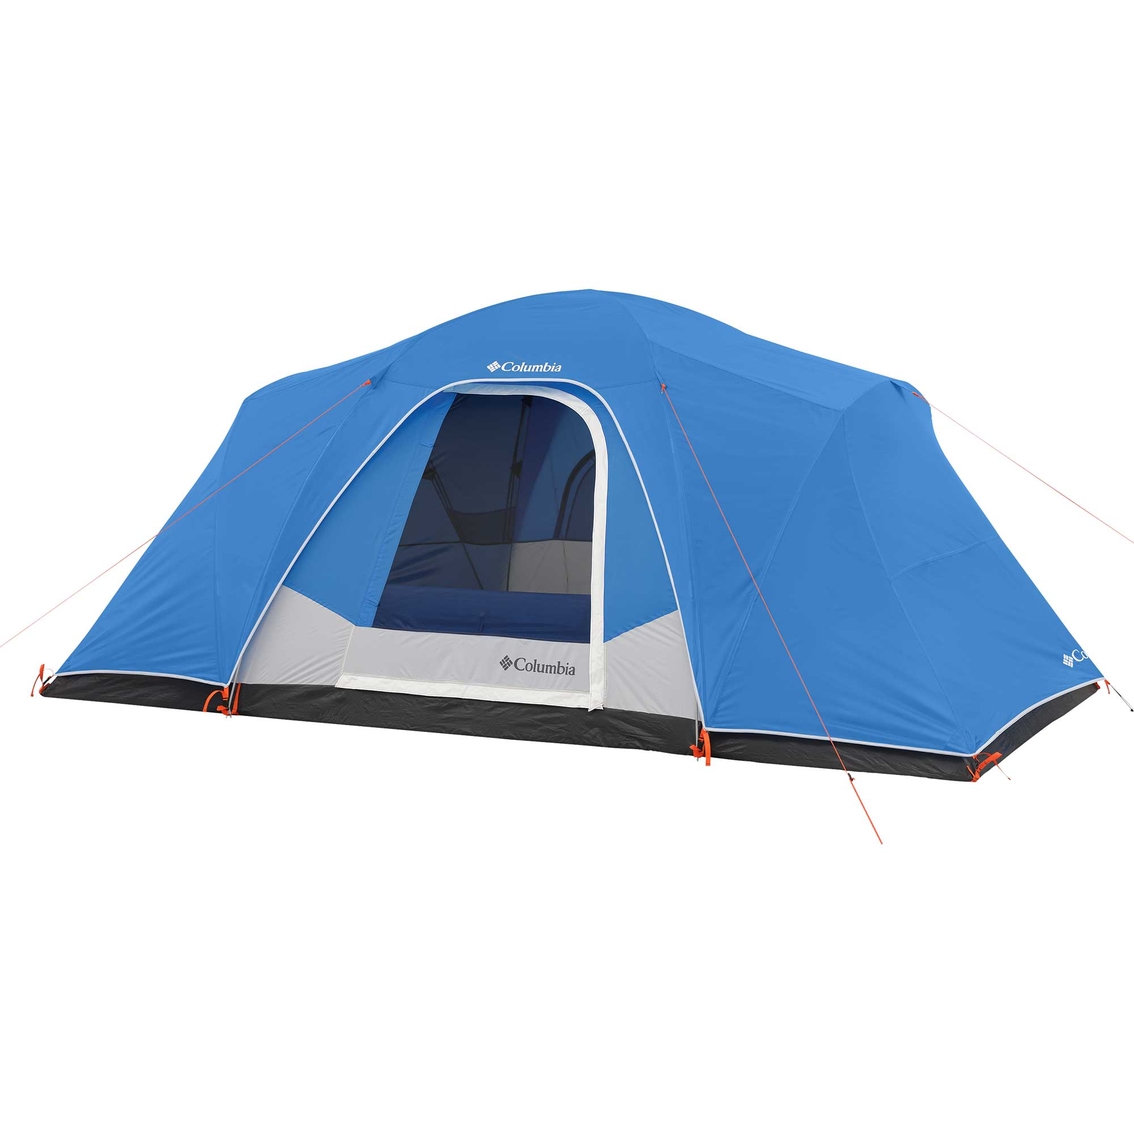 Columbia 8 Person Frp Tent | Tents | Sports & Outdoors | Shop The Exchange